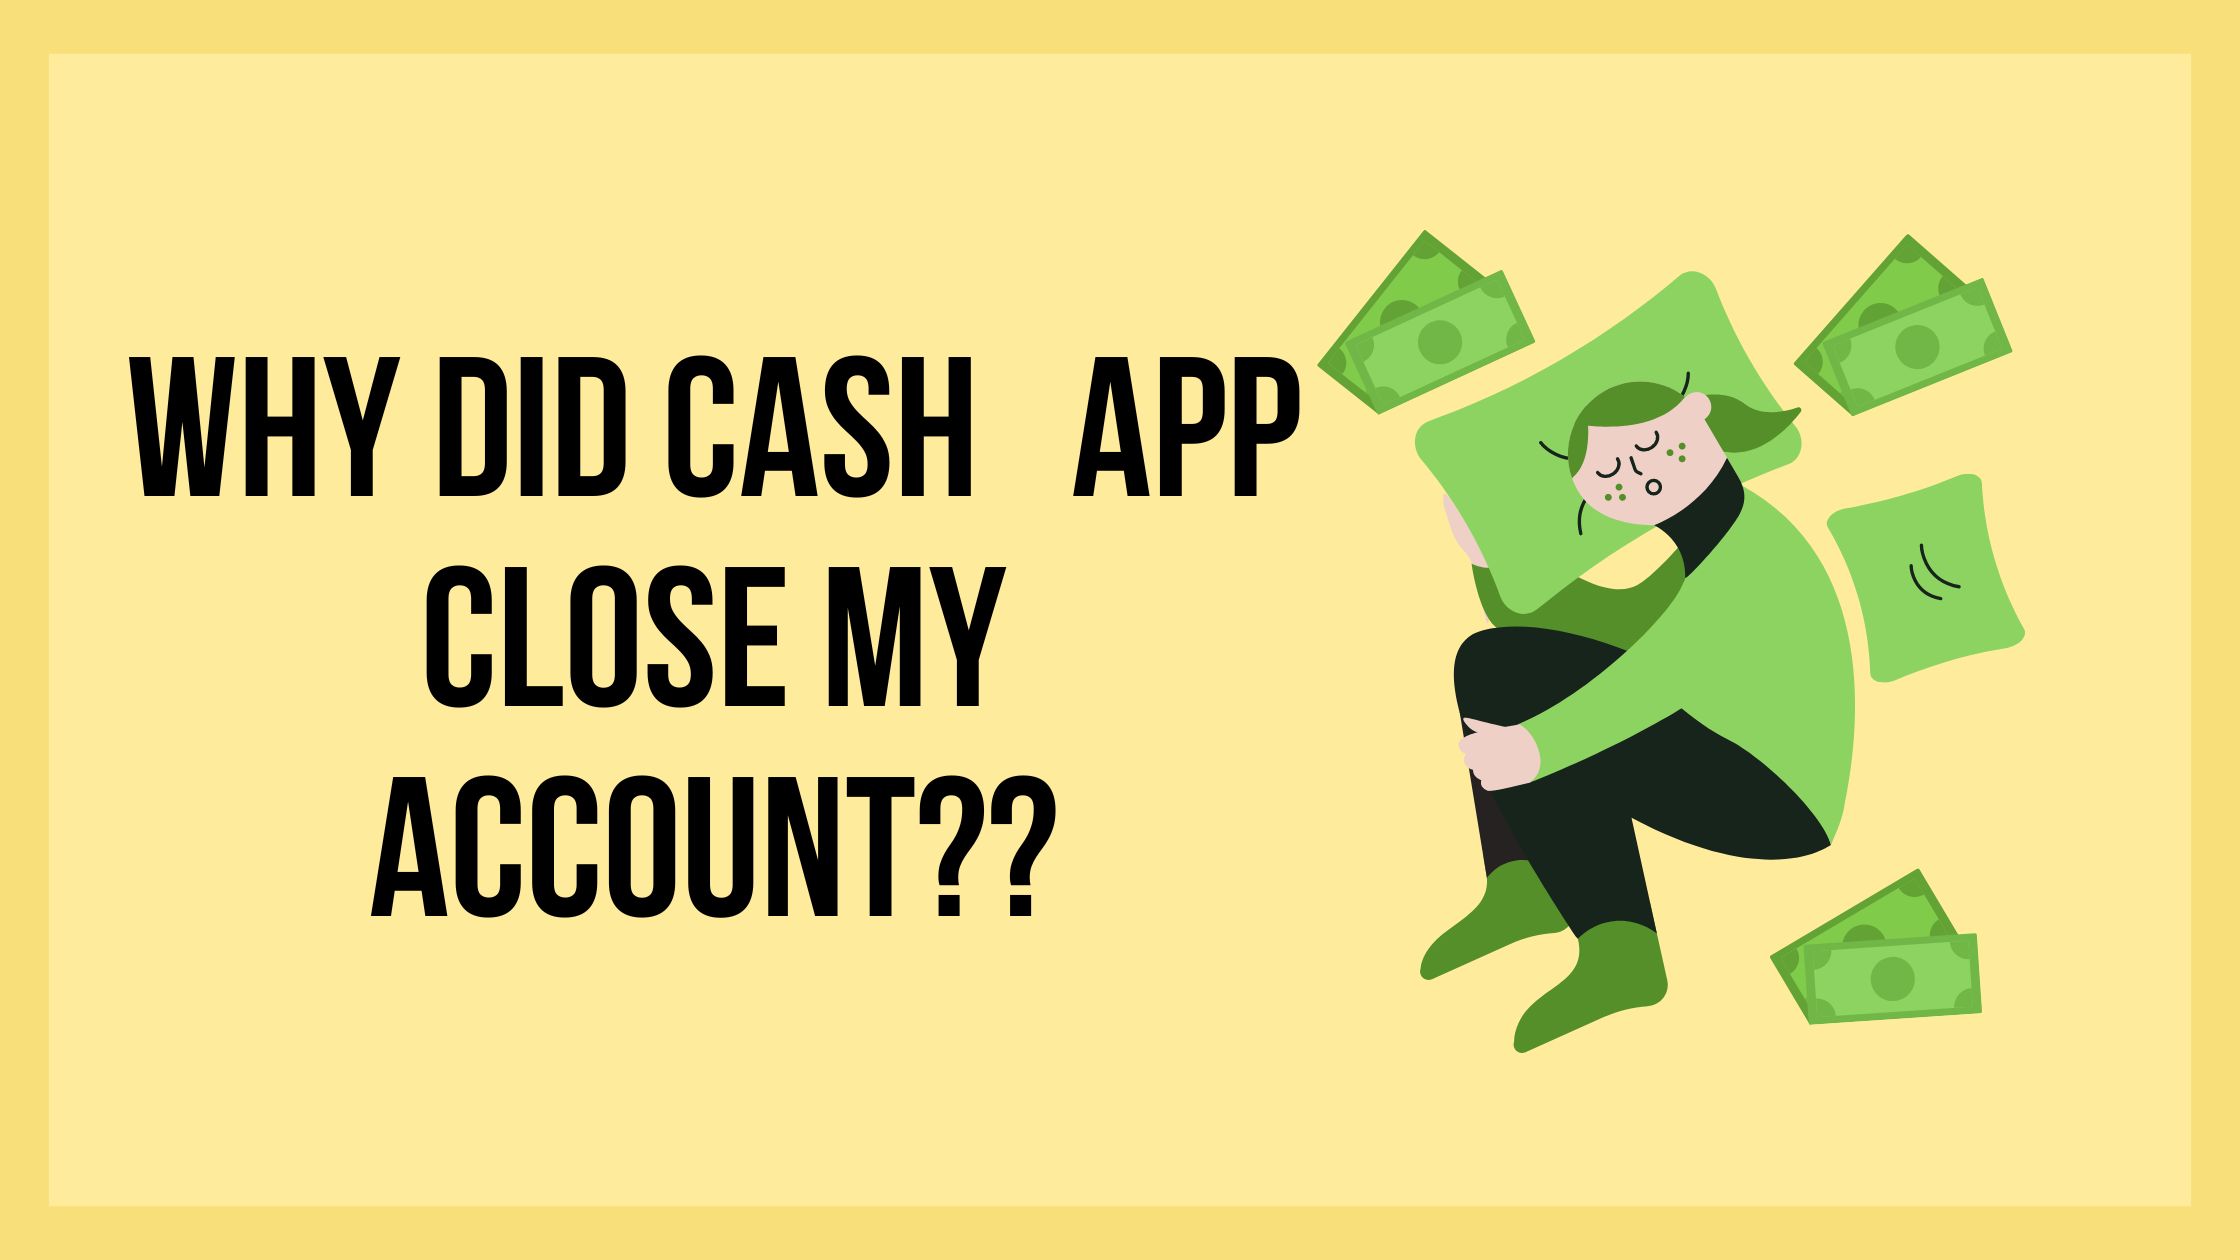 How to Reopen the Closed Cash App Account?